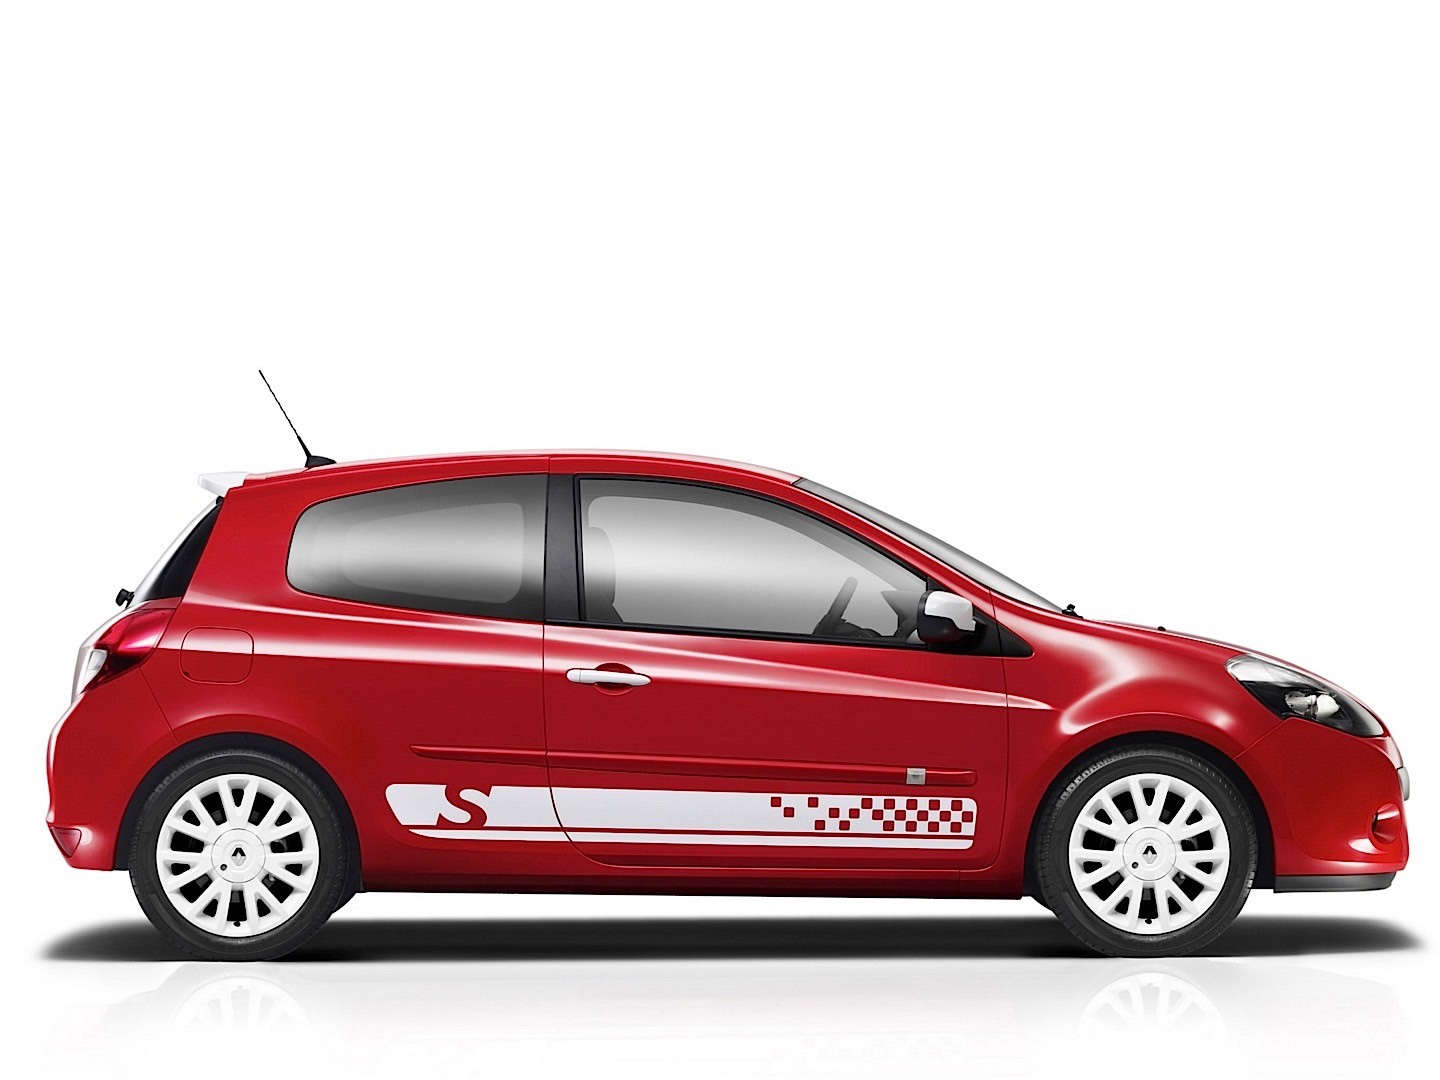 File:Renault Clio III Facelift 20090603 front.JPG - Simple English